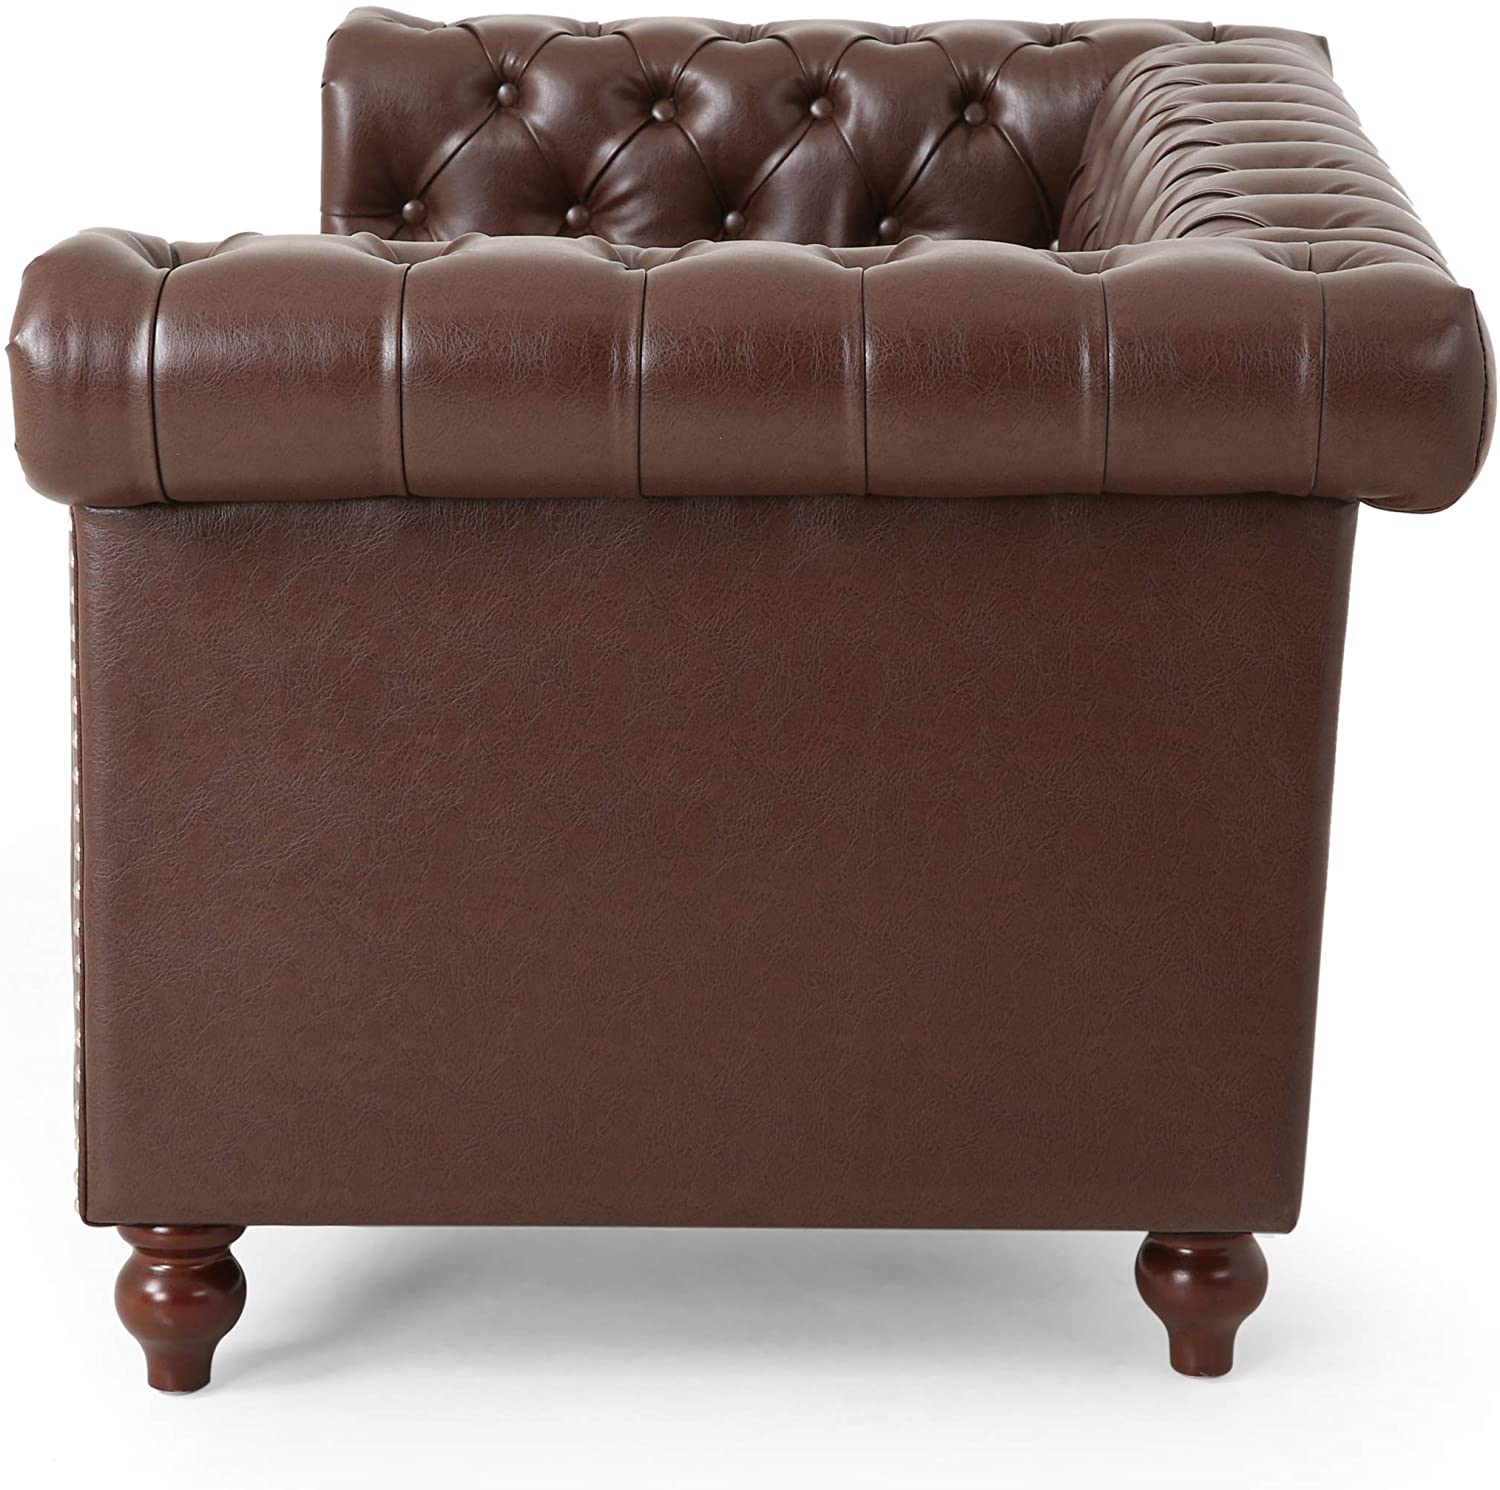 Brinkhaven Leather Love Seats, with Wood Legs